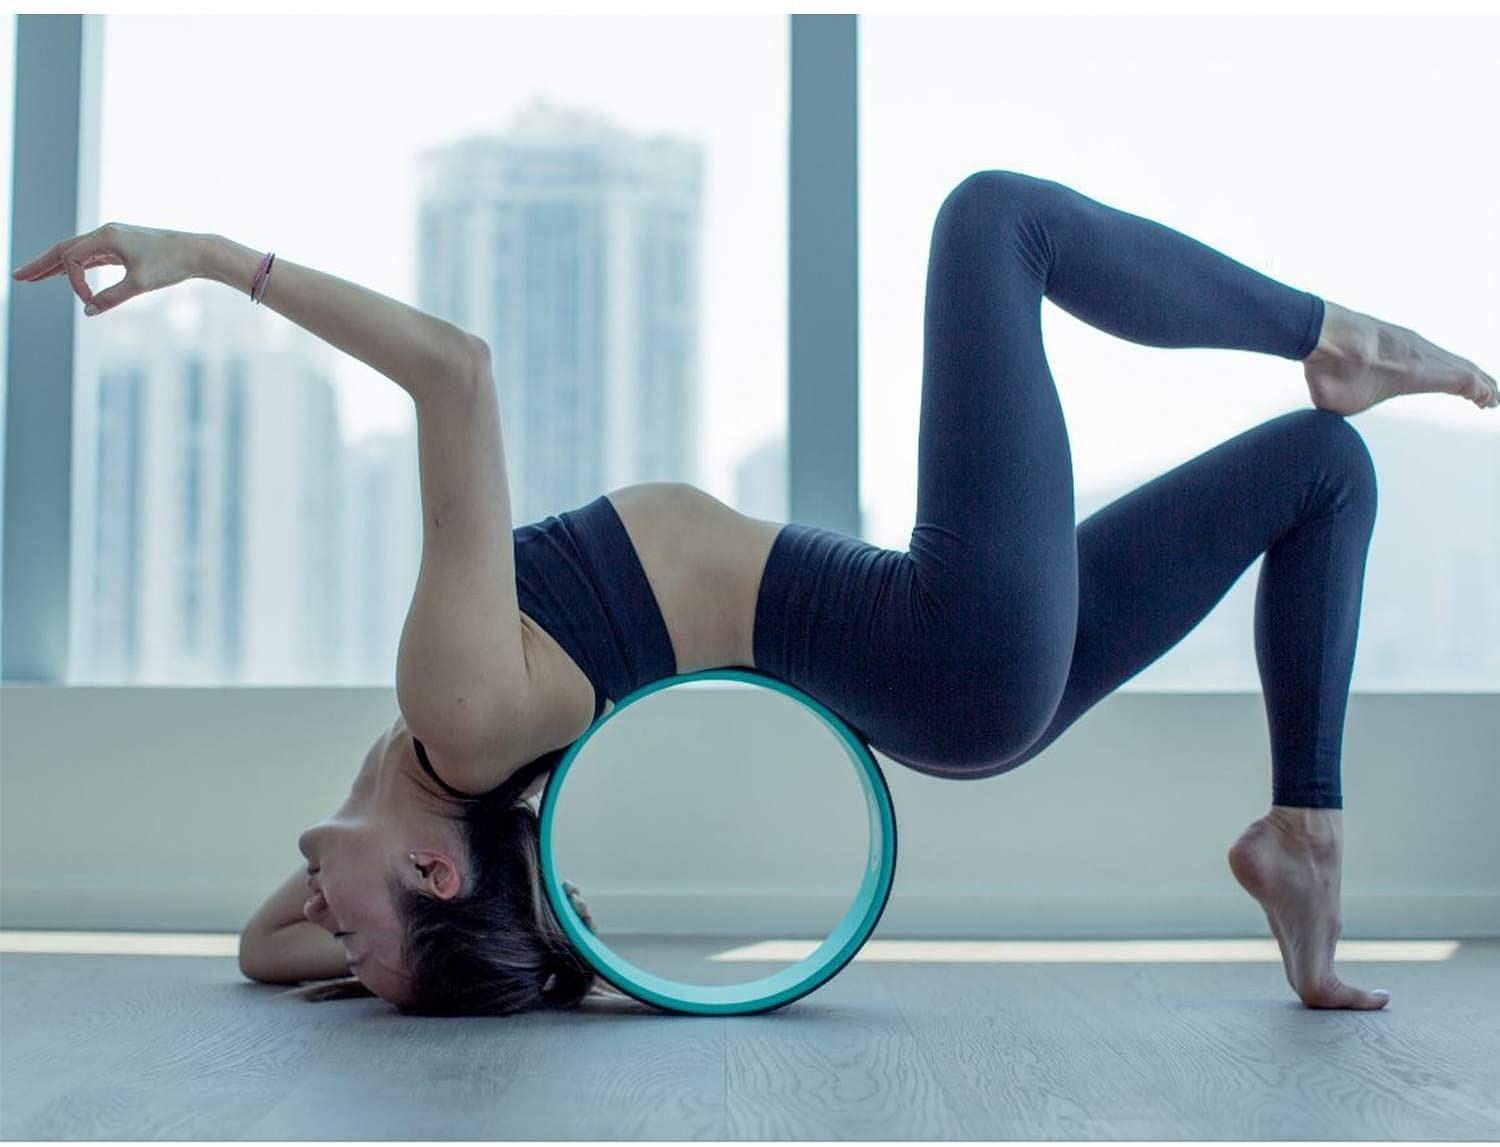 Yoga wheel helps you to deepen your stretches and flexibility while practicing yoga. (Image via www.youryogaclass.com)